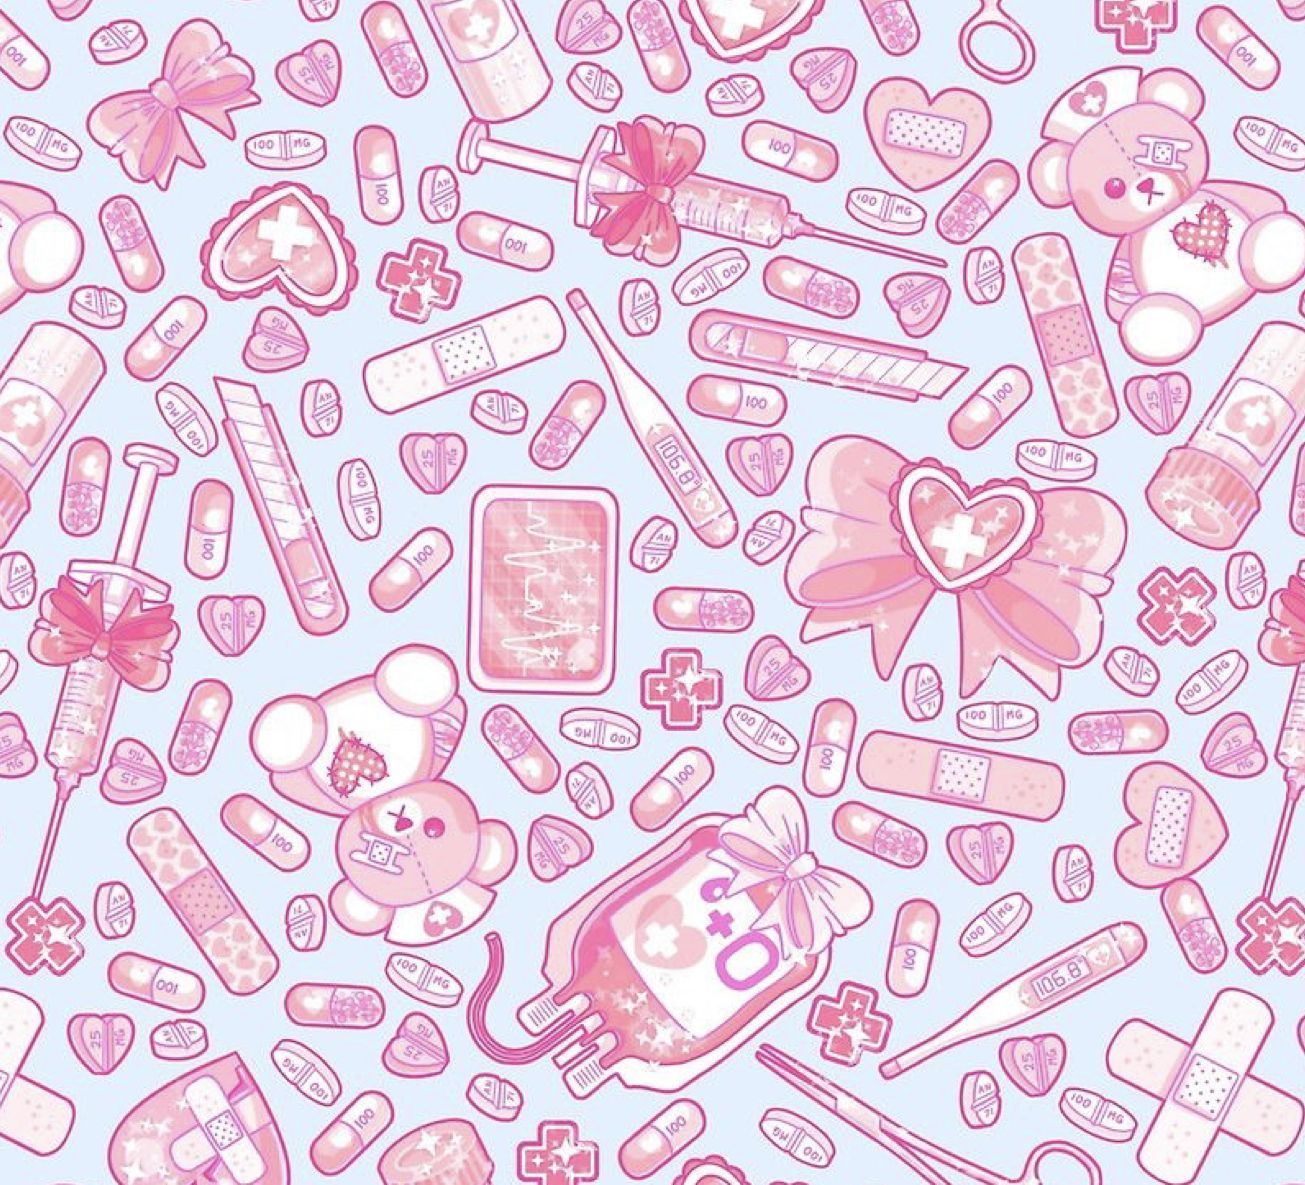 Goth Pink Aesthetic Wallpaper